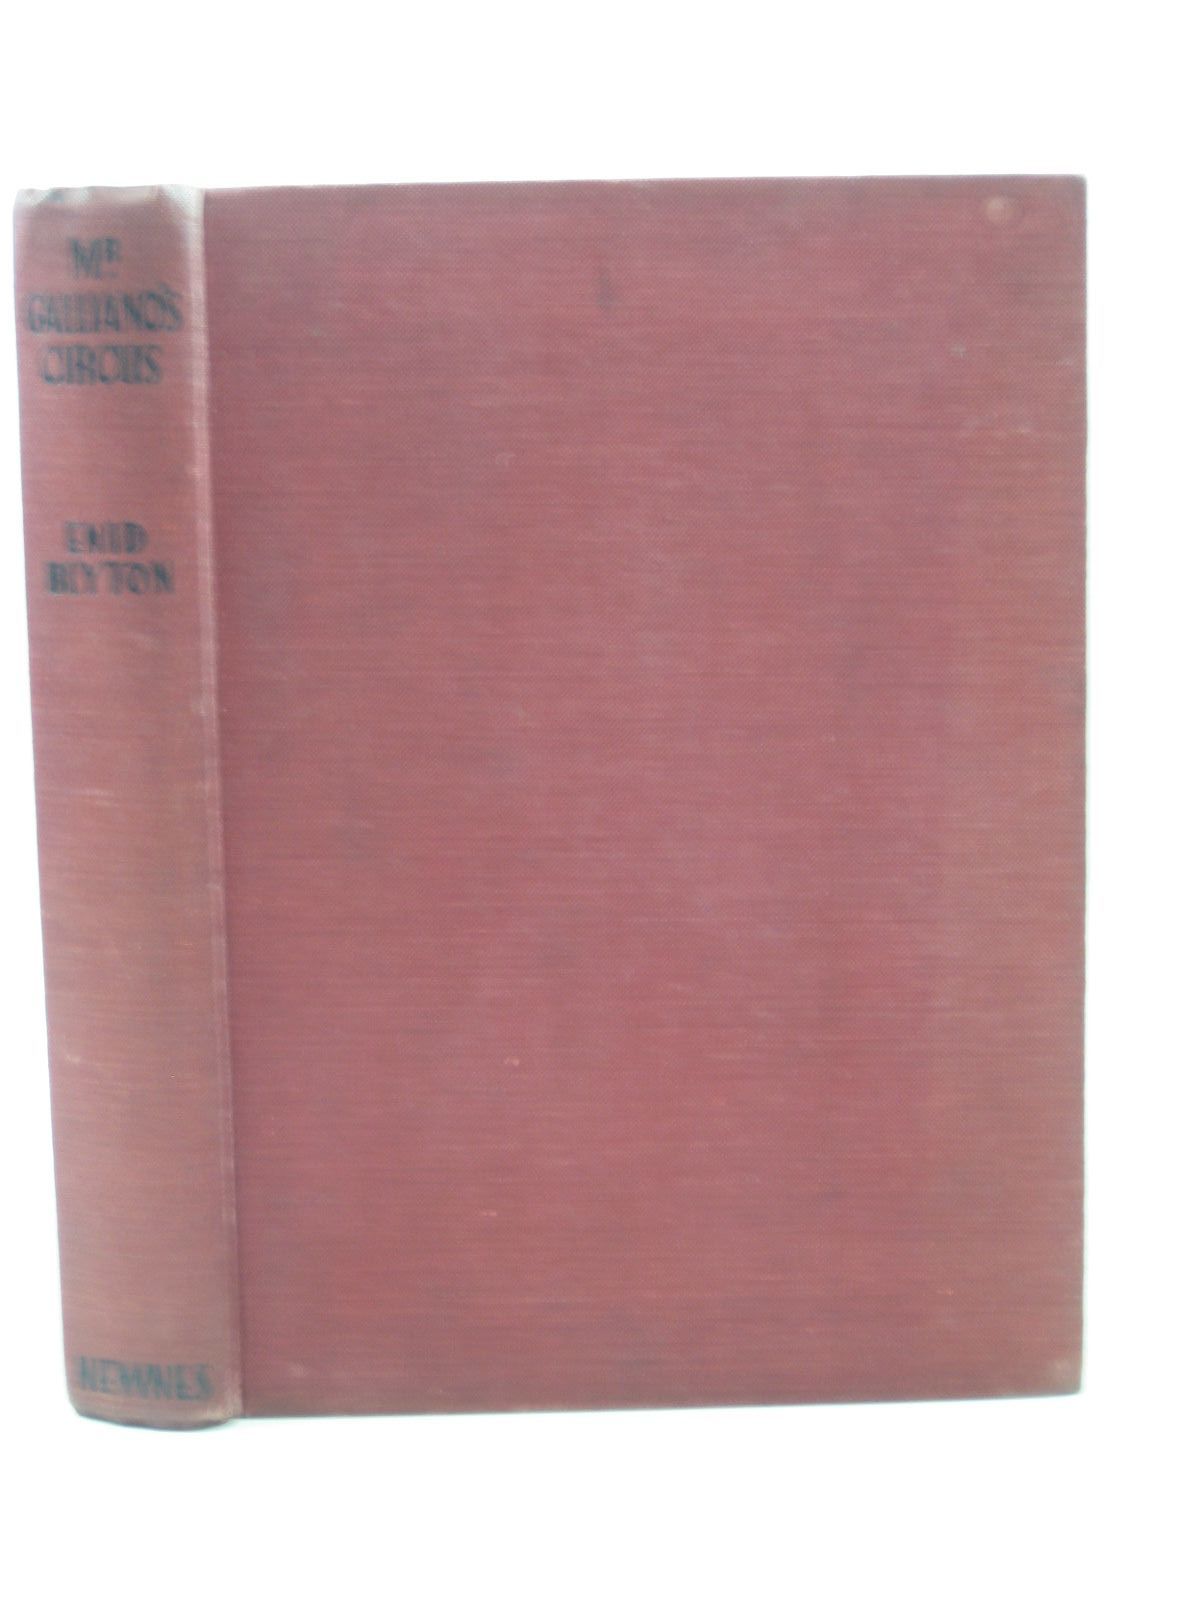 Photo of MR. GALLIANO'S CIRCUS written by Blyton, Enid illustrated by Davie, E.H. published by George Newnes Ltd. (STOCK CODE: 1313996)  for sale by Stella & Rose's Books